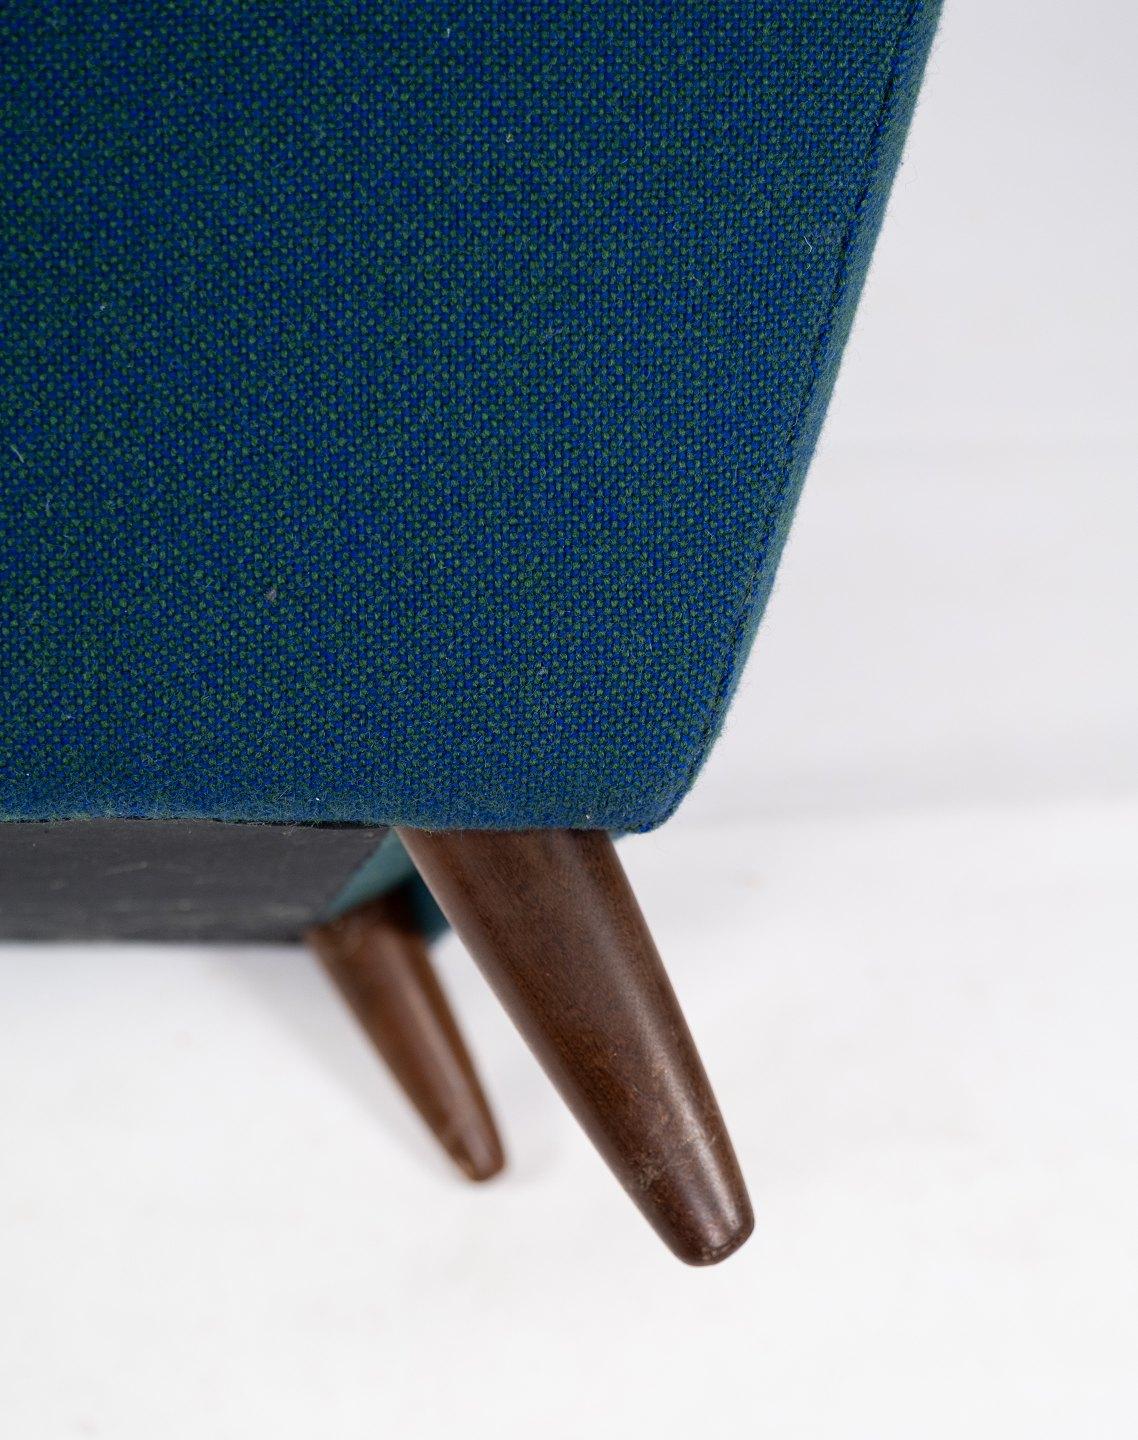 Armchair Upholstered with Dark Blue Wool Fabric and Legs in Dark Wood, 1960s For Sale 3